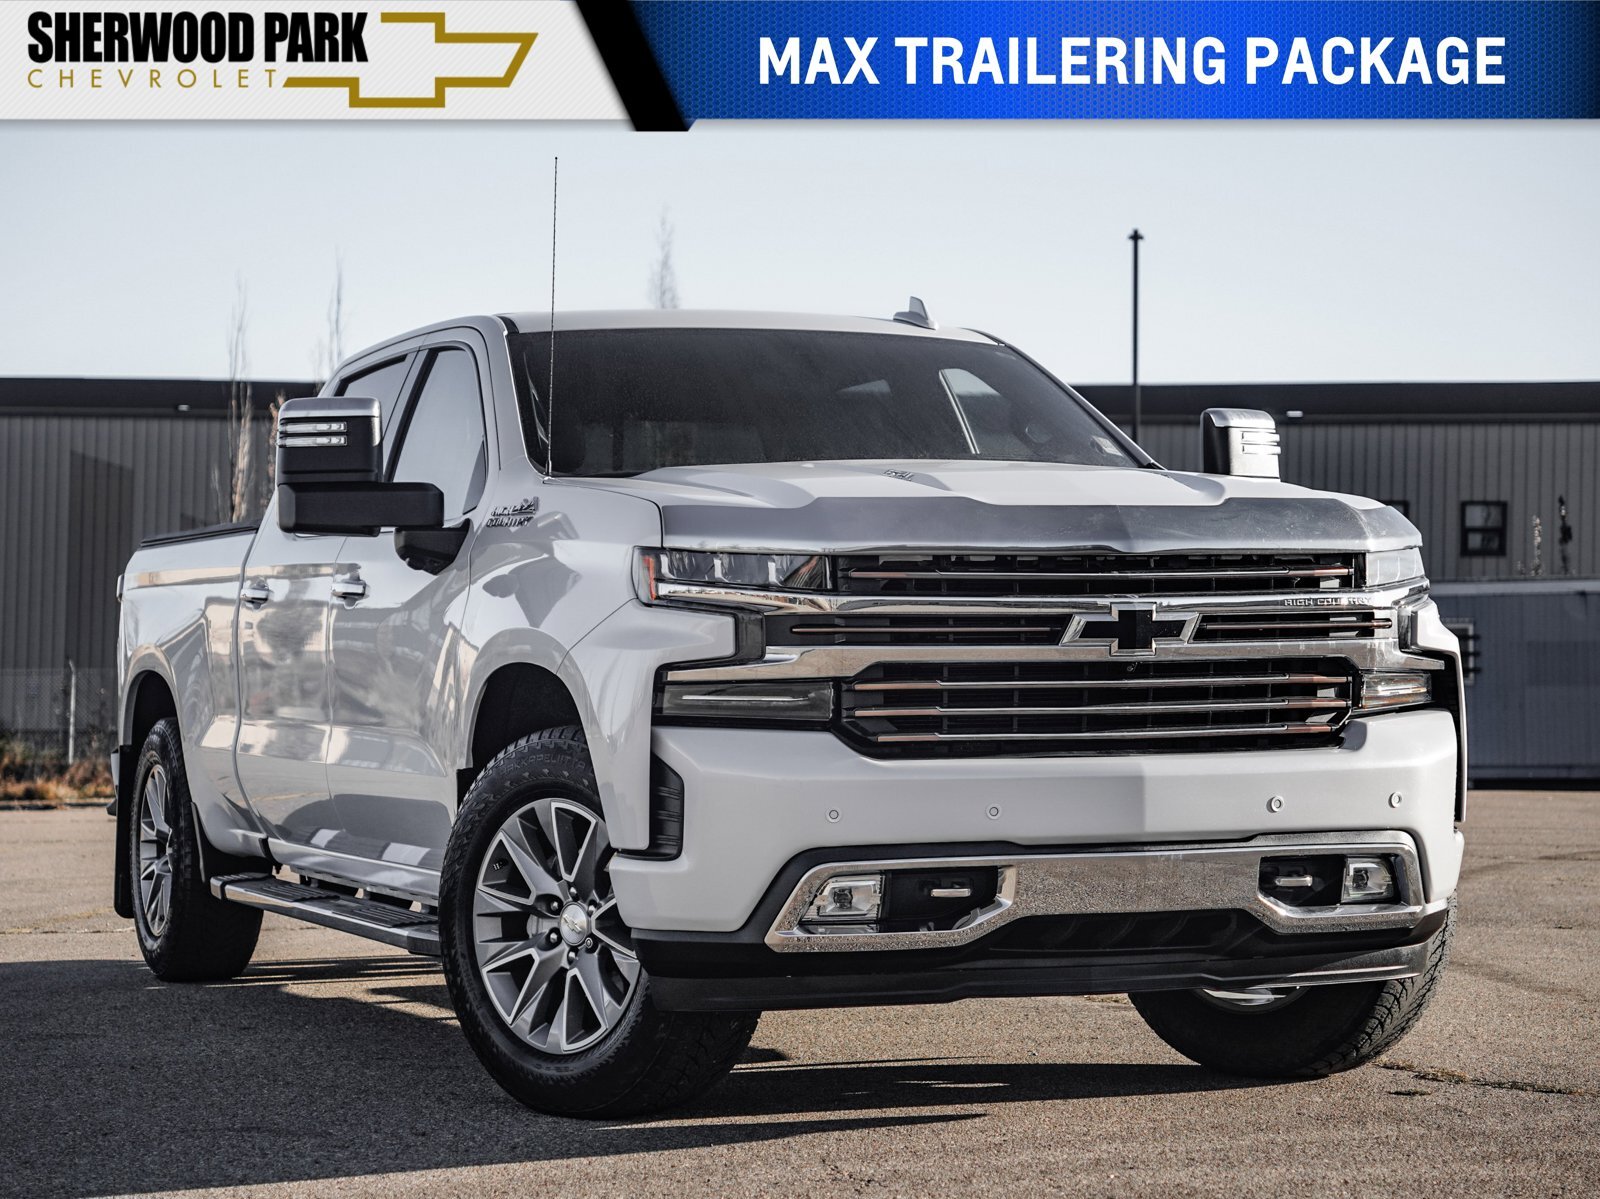 2020 Chevrolet Silverado 1500 High Country 6.2L Max Trailering Package